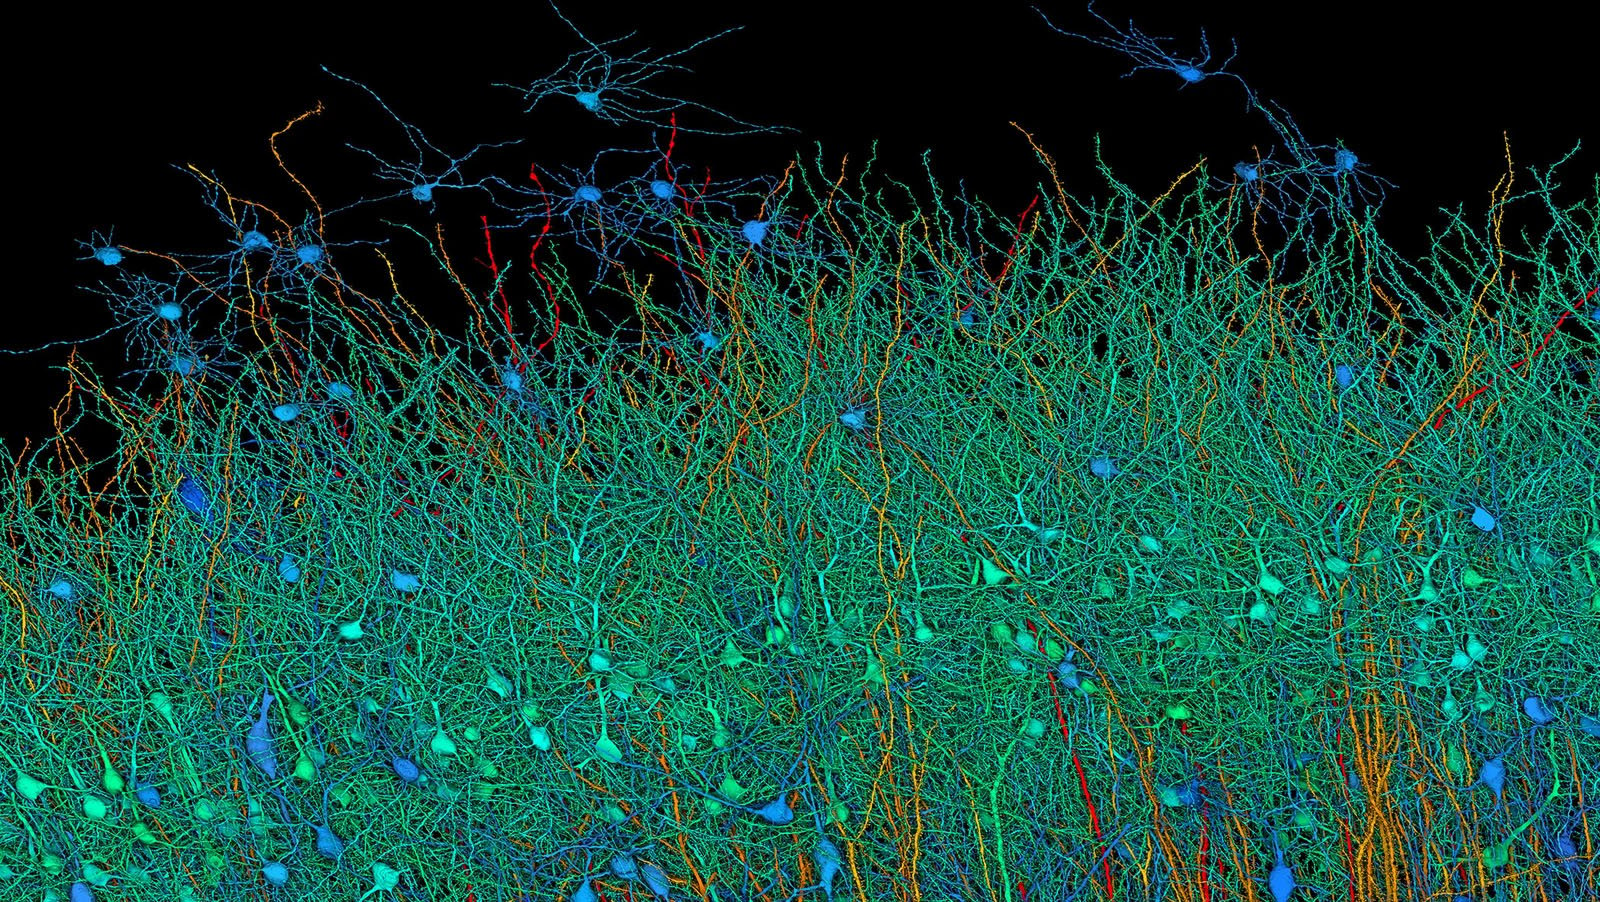 3D visualization of neural networks showing interconnected neurons with dendrites in various colors like teal, blue, and orange against a dark background.